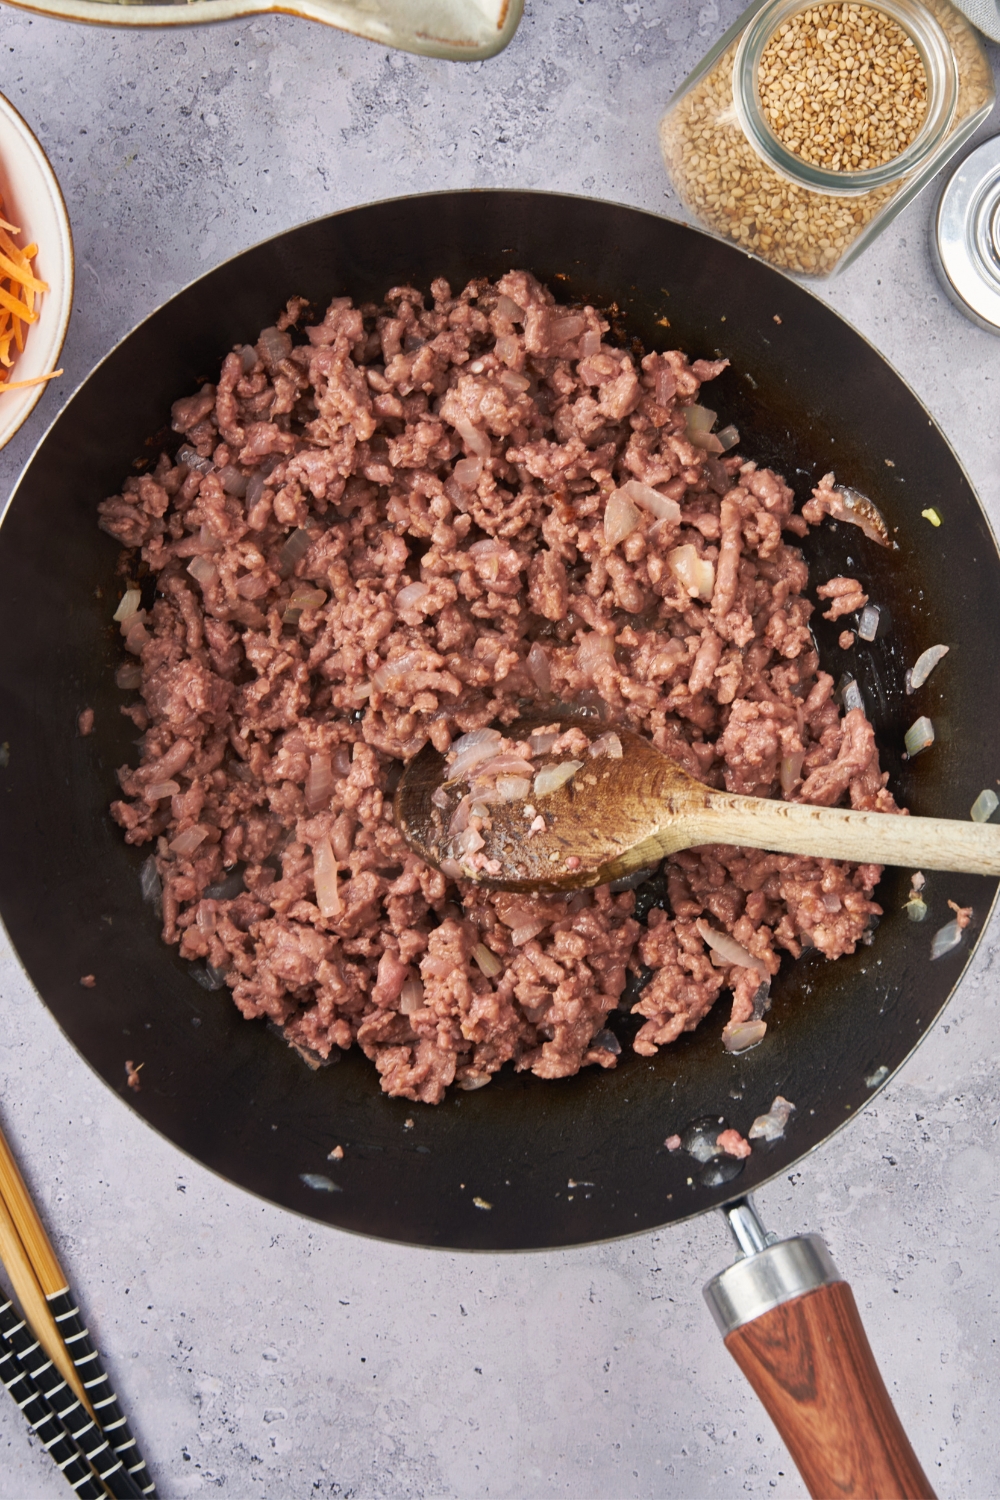 A skillet with ground beef cooking.